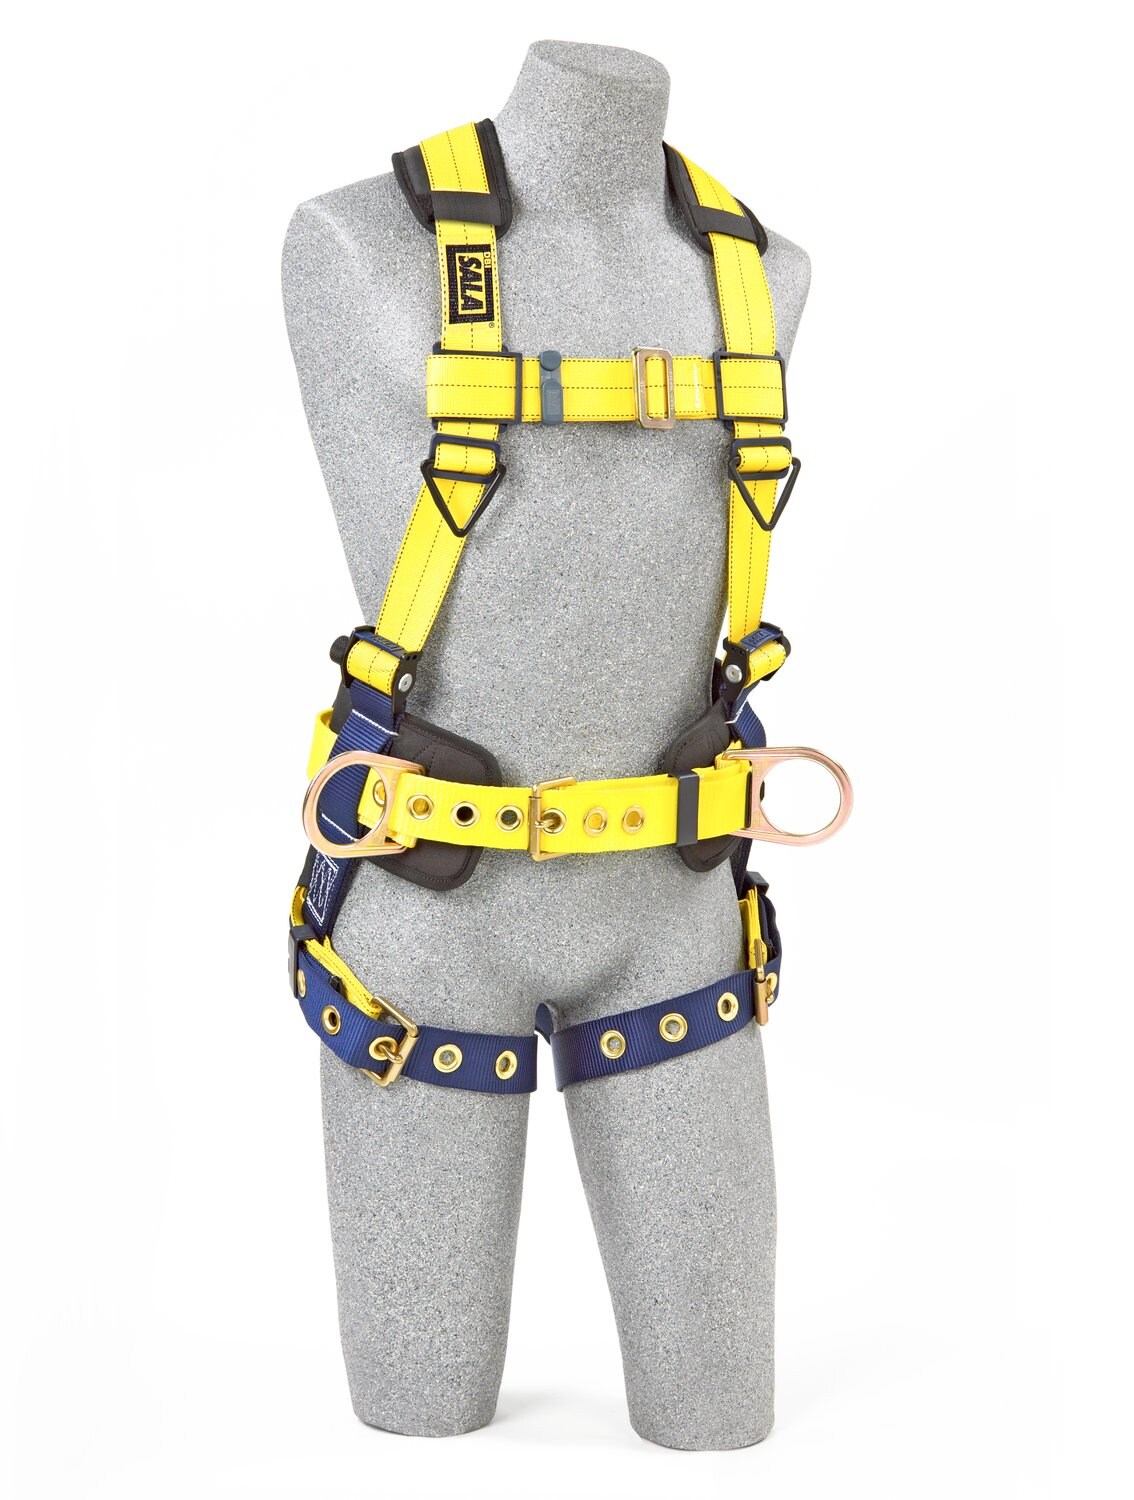 7012815358 - 3M DBI-SALA Delta Construction Positioning Safety Harness with Shoulder Pads 1102205, 2X